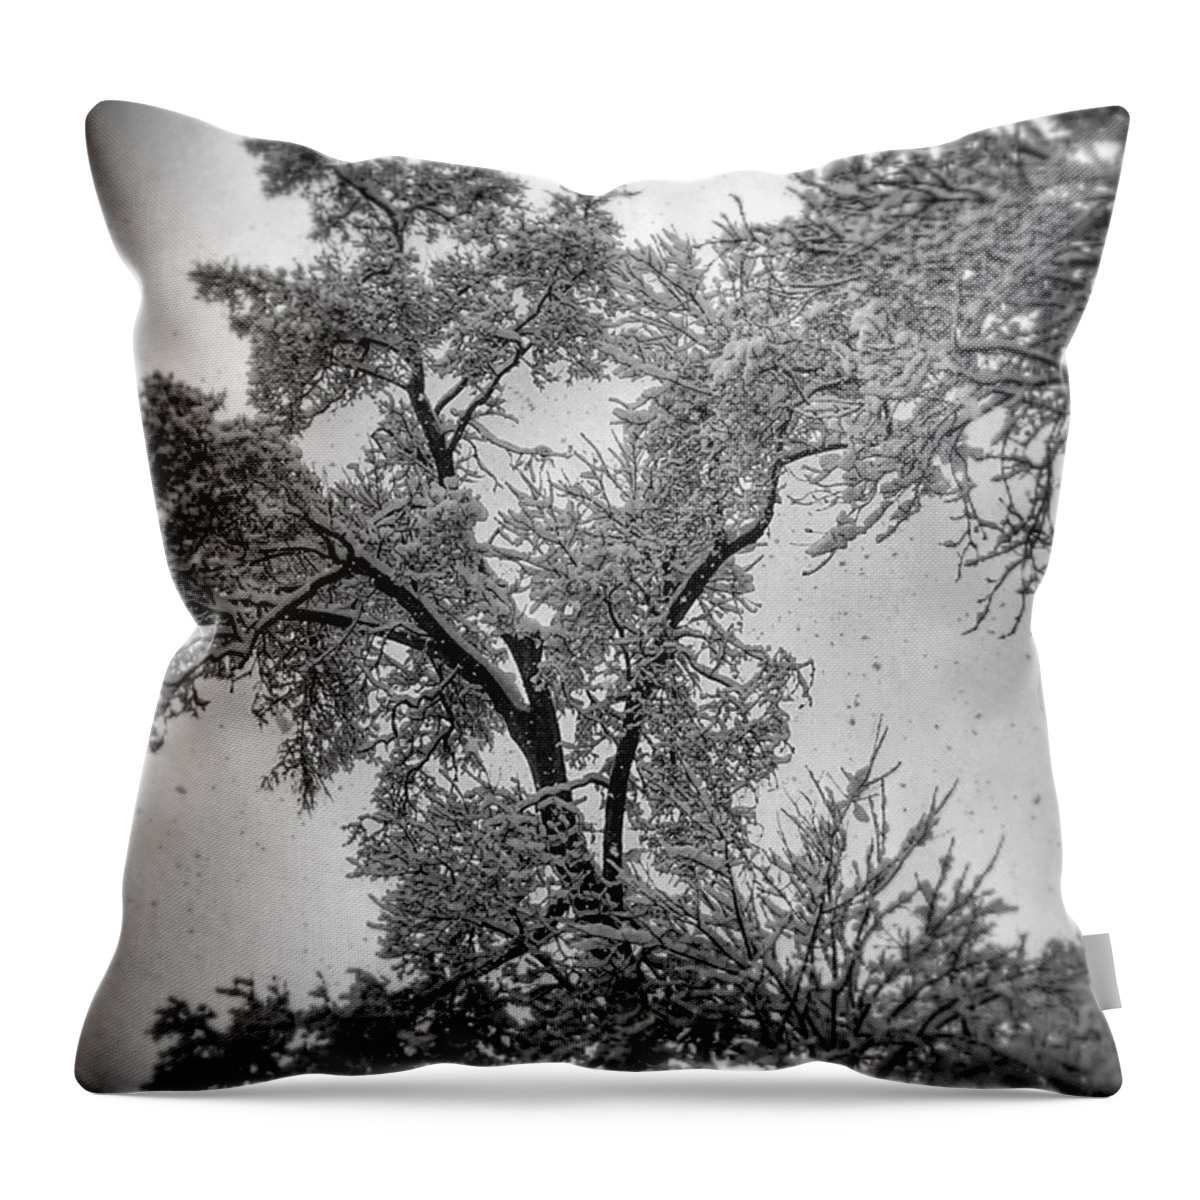 Snow Throw Pillow featuring the photograph Early Snow by Steven Huszar